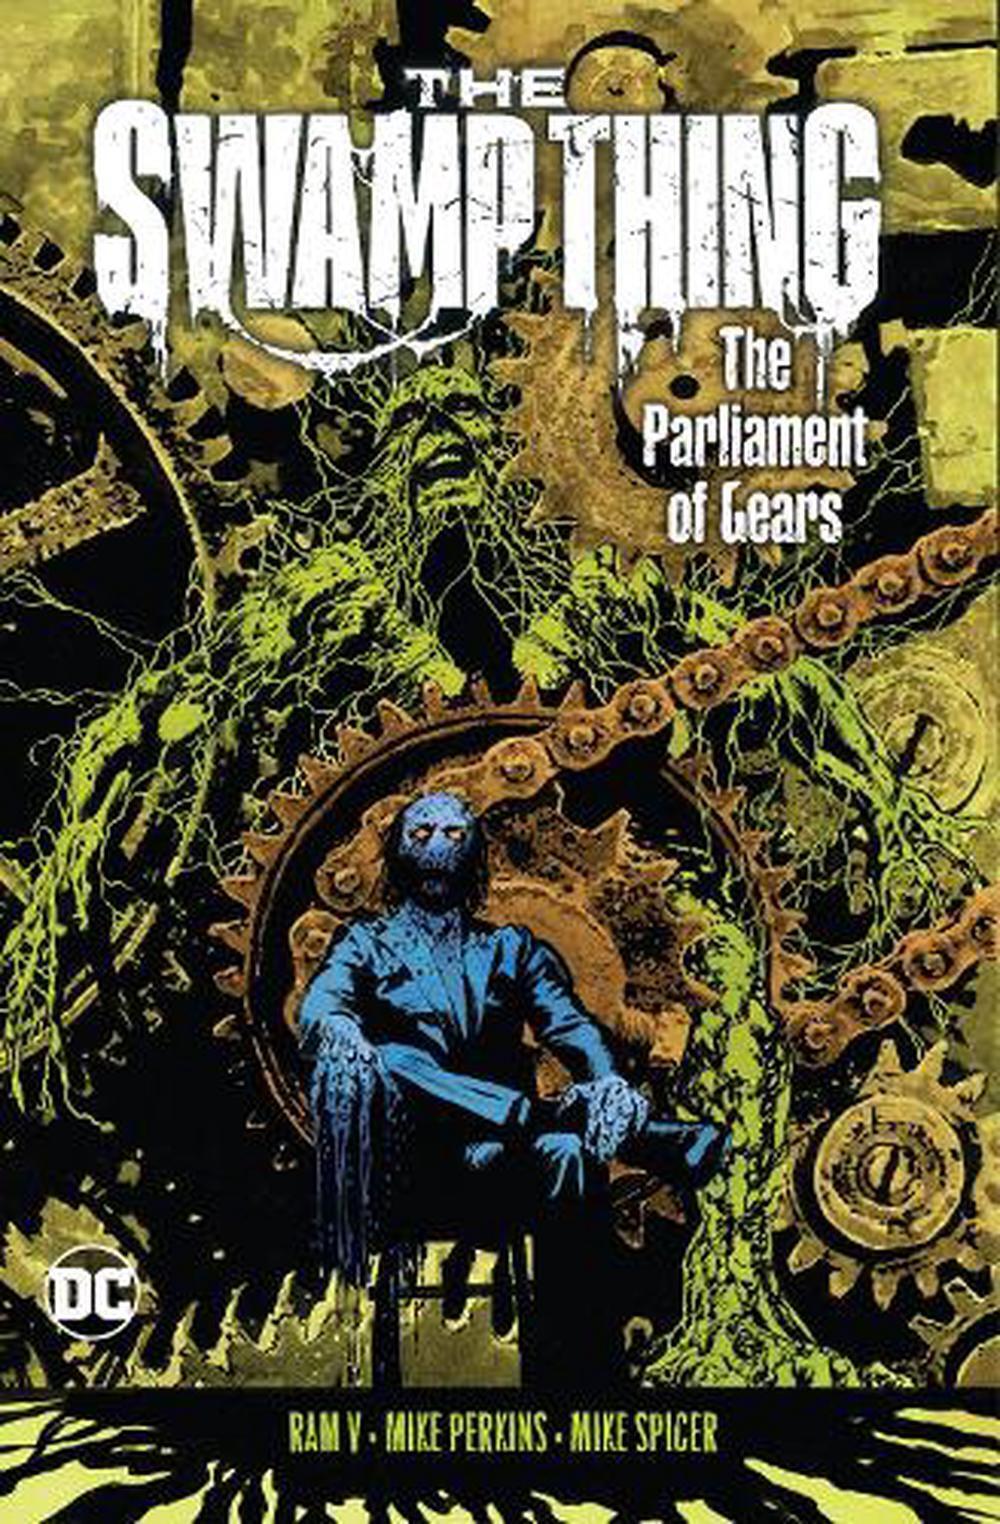 The Swamp Thing Volume 3: The Parliament of Gears by Ram V. (English) Paperback 